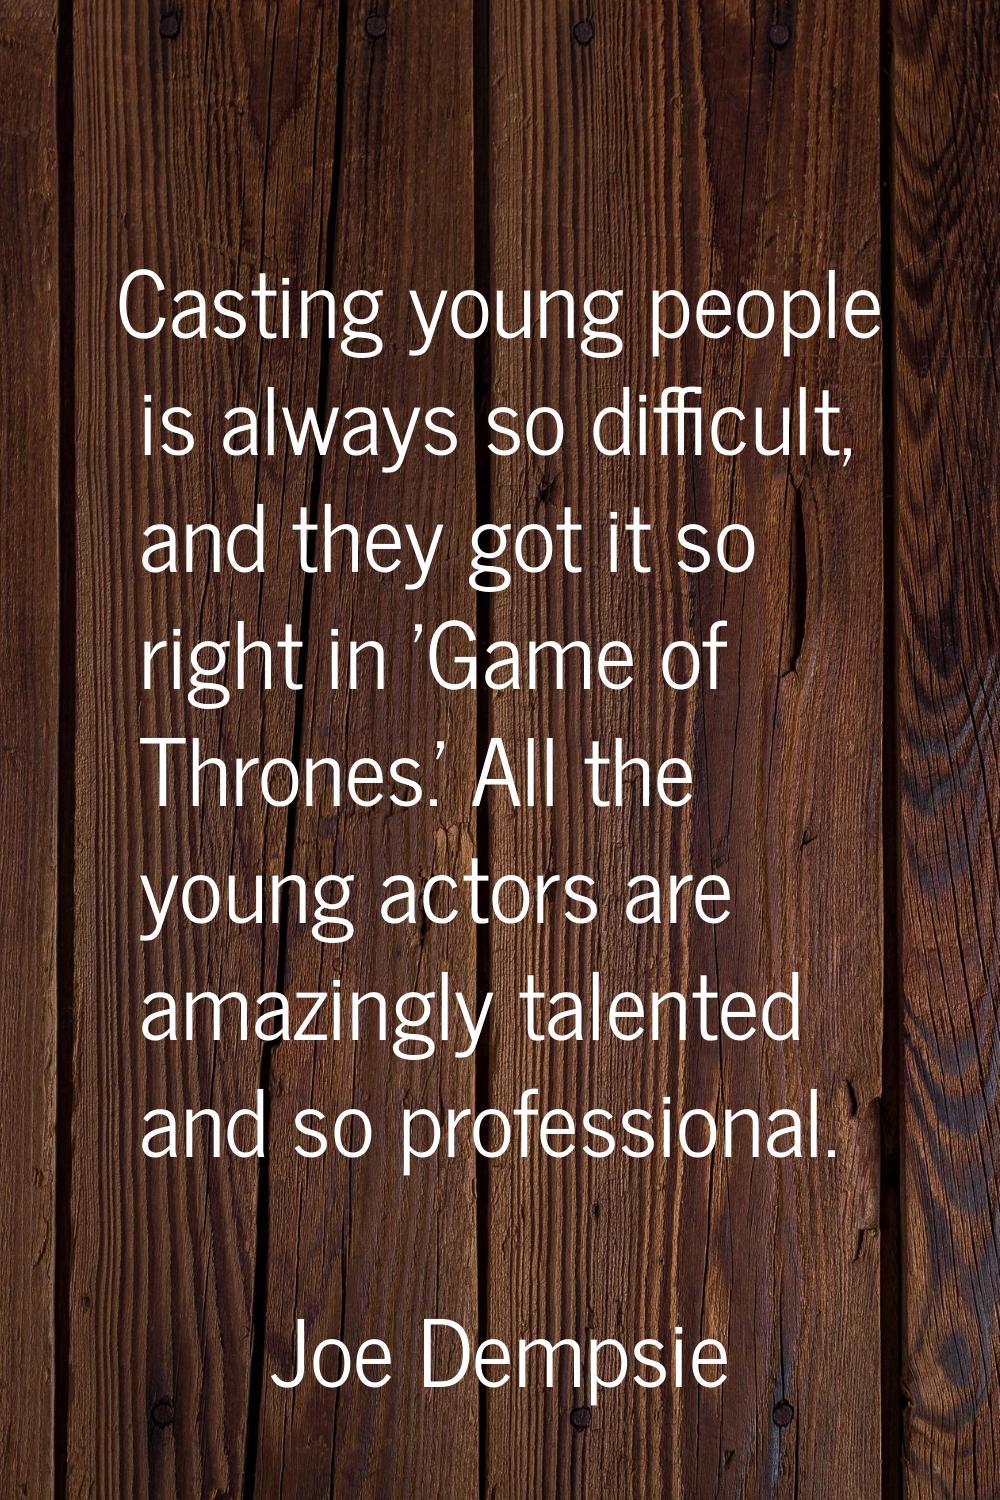 Casting young people is always so difficult, and they got it so right in 'Game of Thrones.' All the